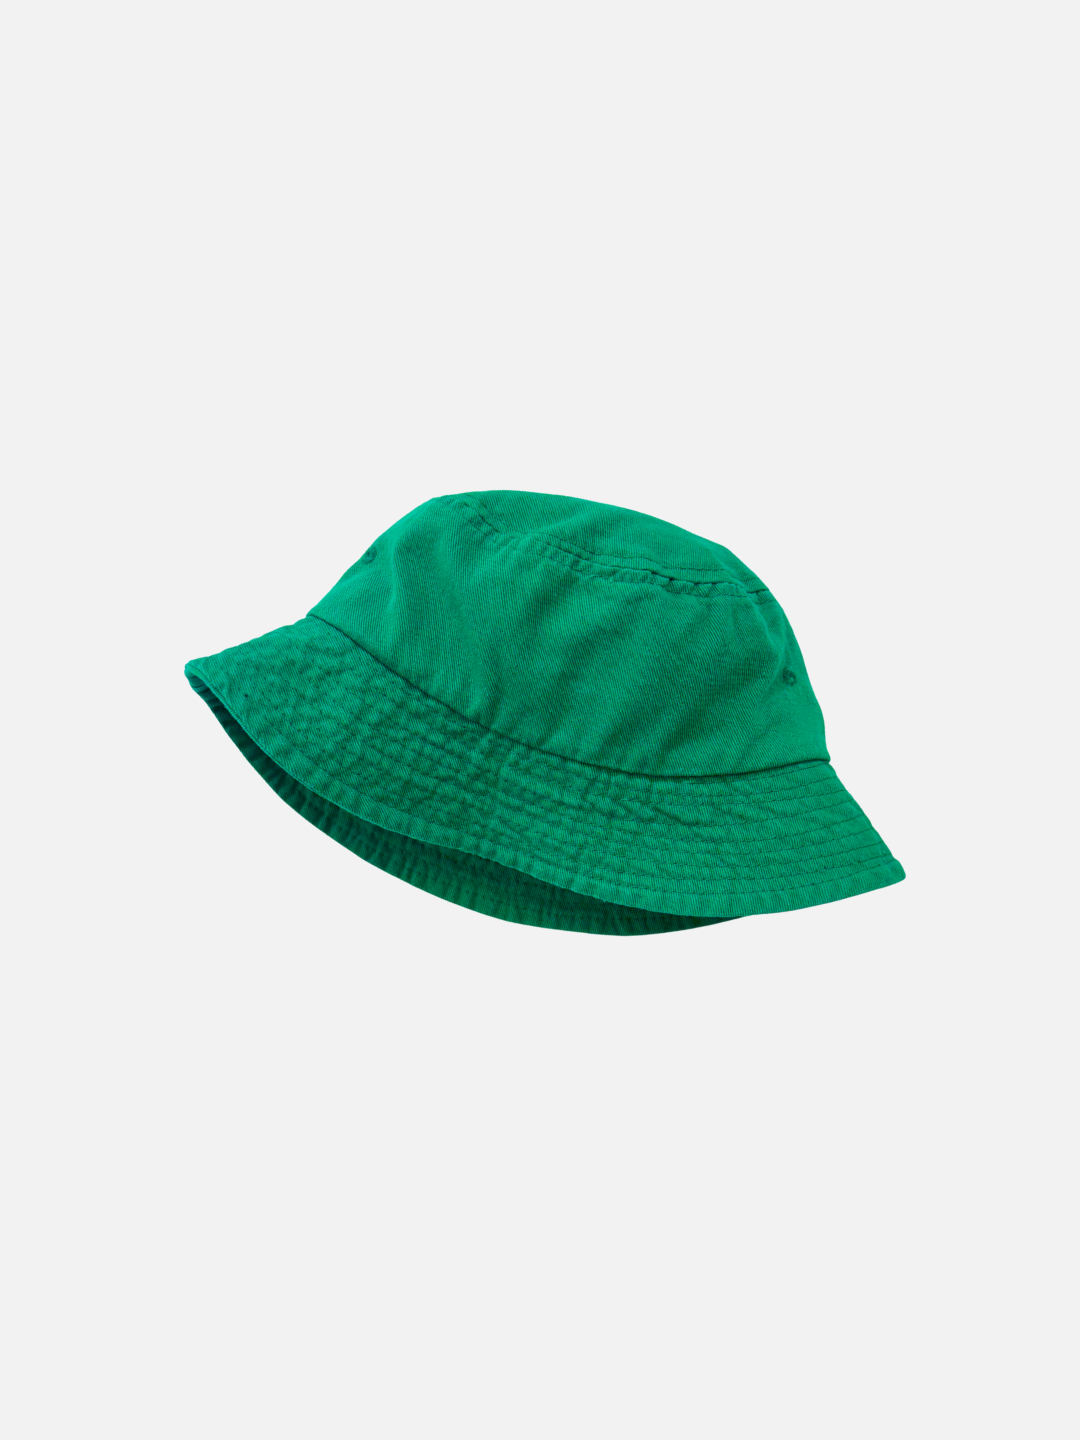 Green | A FRONT VIEW OF KID'S PICNIC BUCKET HAT IN KELLY GREEN